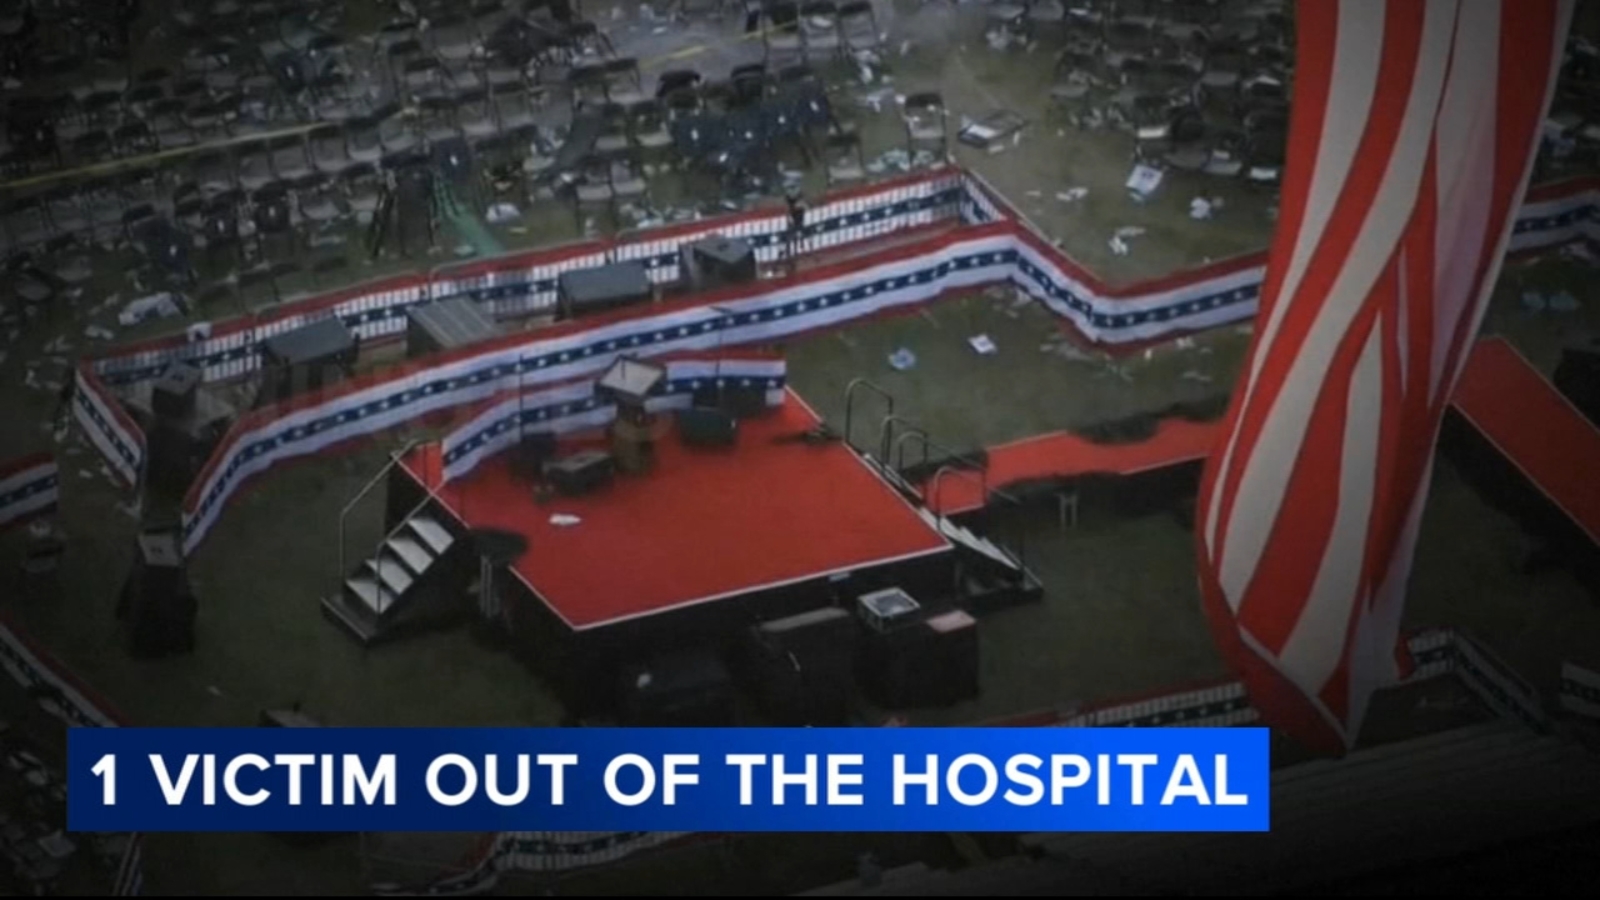 Trump rally shooting victim, David Dutch, released from hospital; 2nd survivor James Copenhaver remains hospitalized [Video]